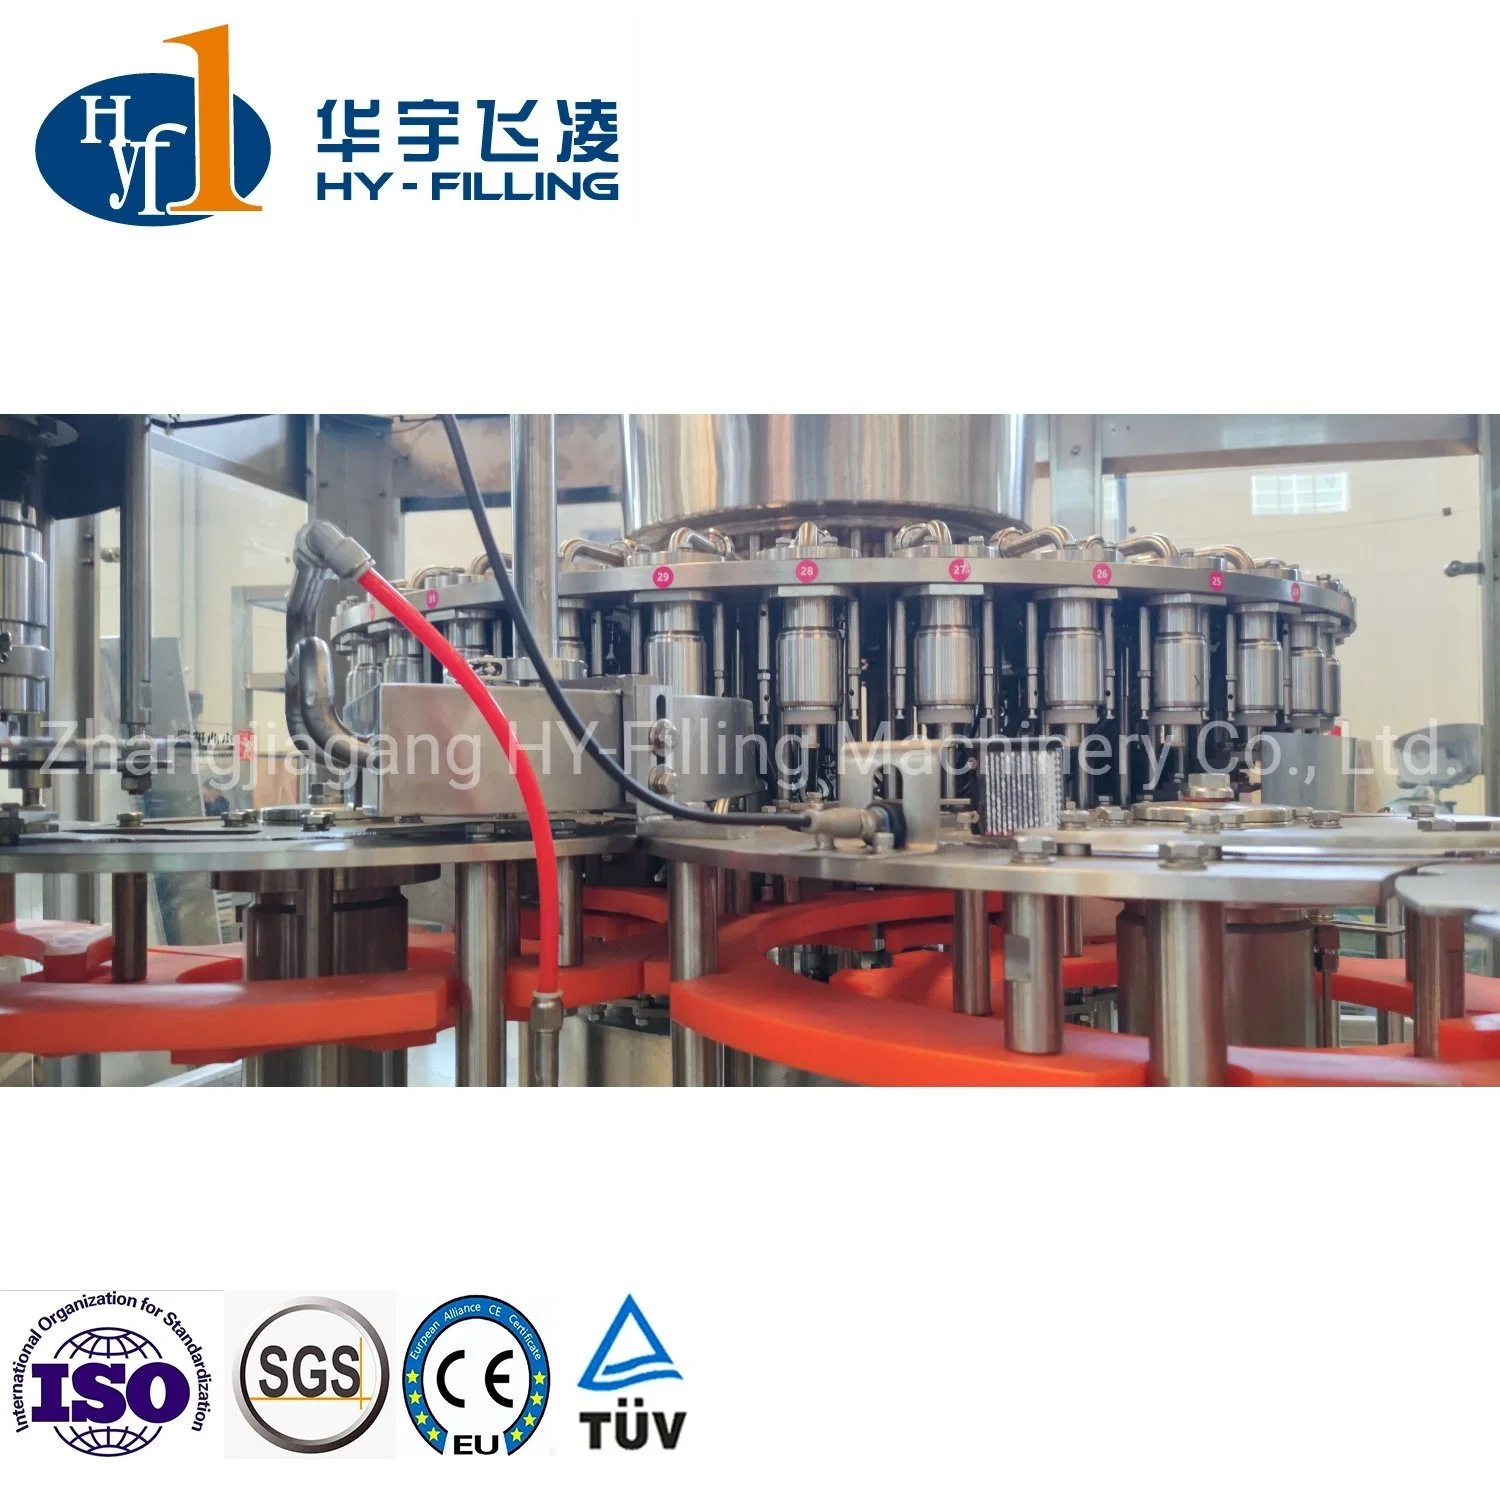 Blowing -Filling- Capping Fully Automatic Pet Bottle Beverage Packaging Line Shampoo Skin Care Product Juice Sauce Jam Juice Production Beverage Filling Line